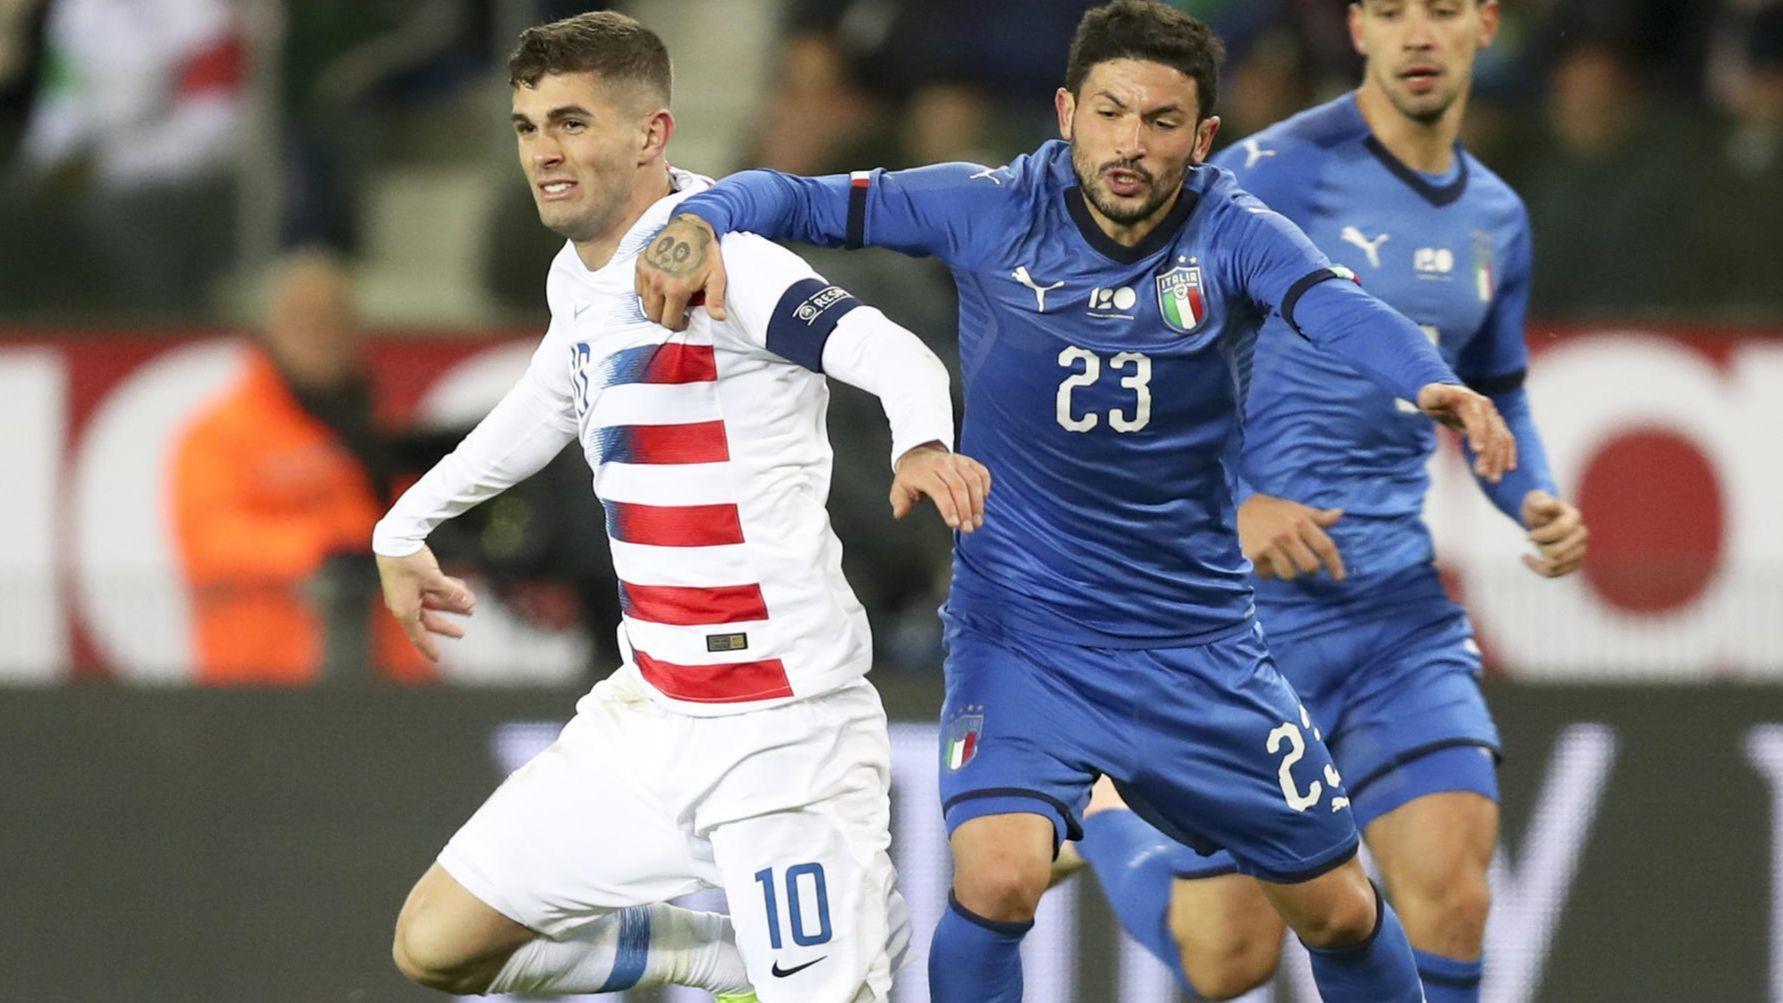 Christian Pulisic, 20, becomes youngest in modern era to captain U.S